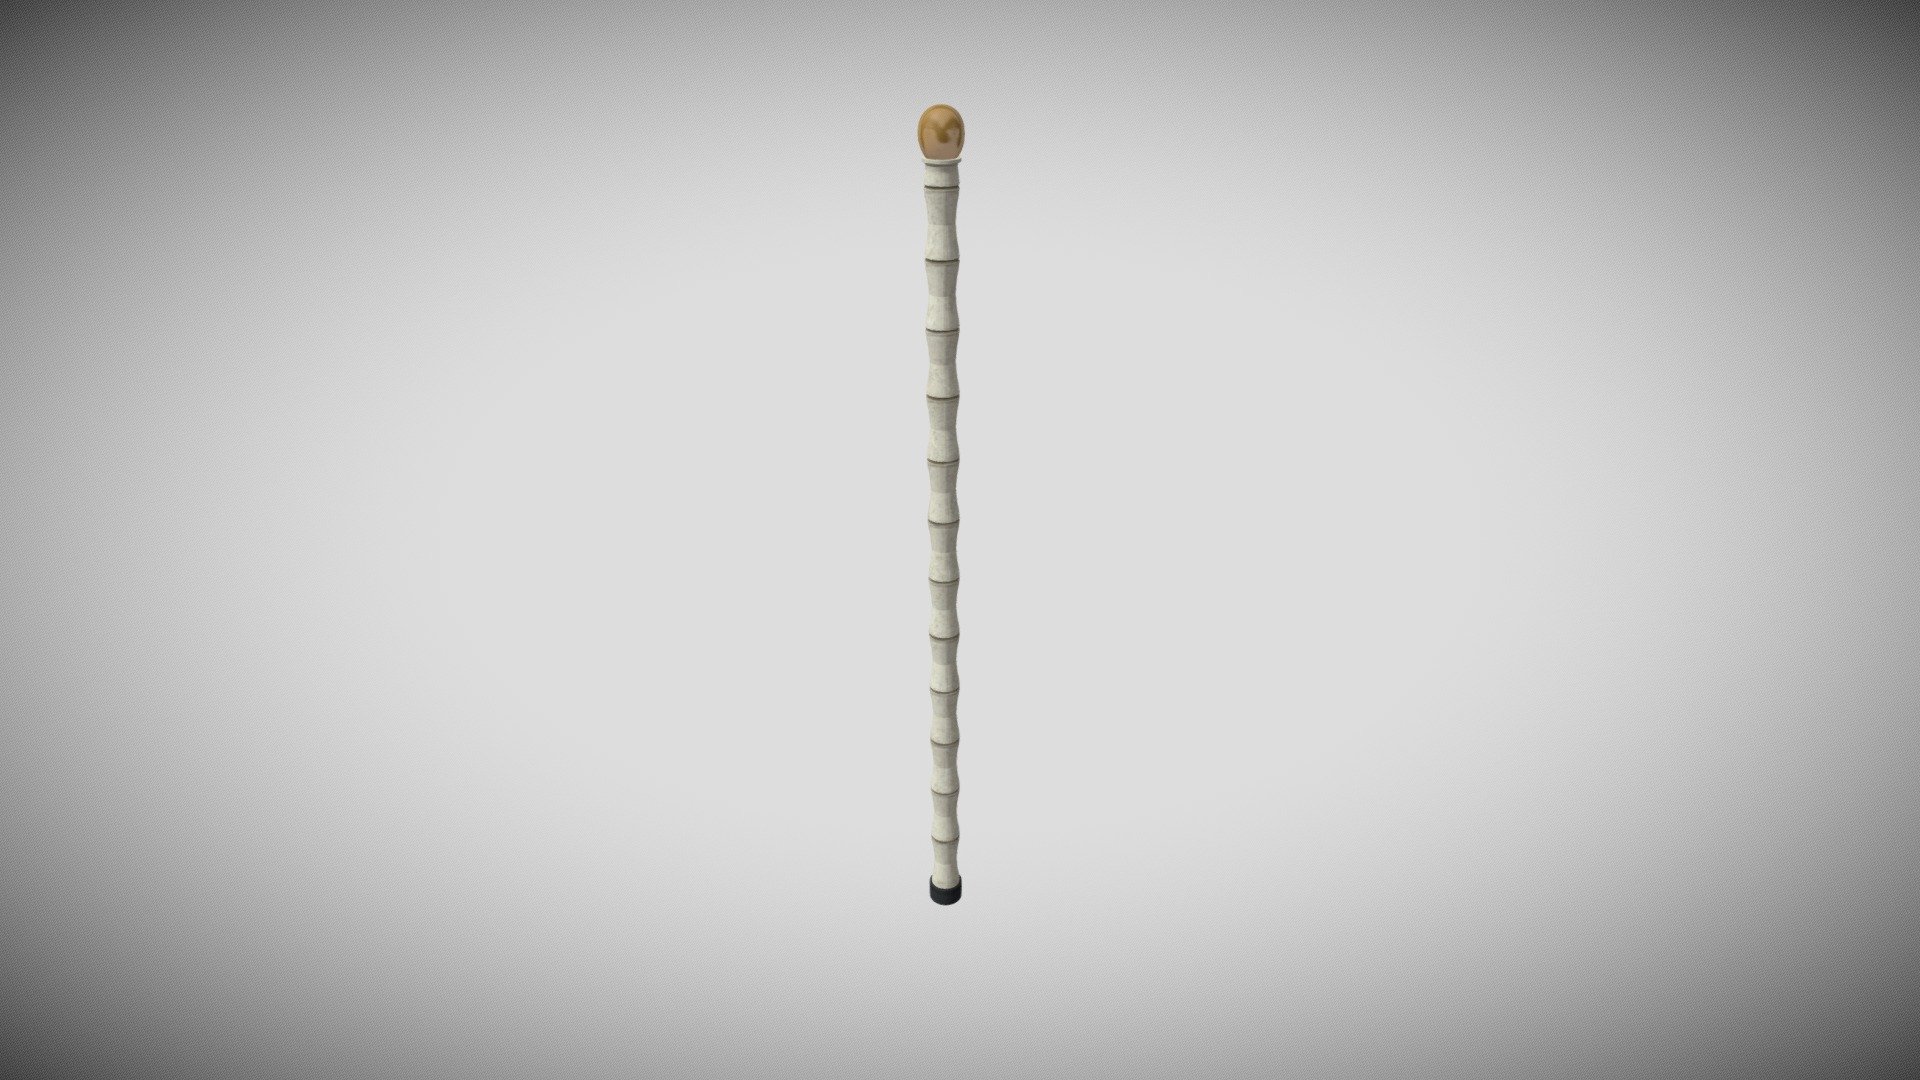 3D recreation of John Hammond's cane from Jurassic Park. The cane features a piece of polished amber with a mosquito inclusion at the top. Created for an interactive Museum Experience - John Hammond's Cane (Jurassic Park) - 3D model by niallplatt 3d model